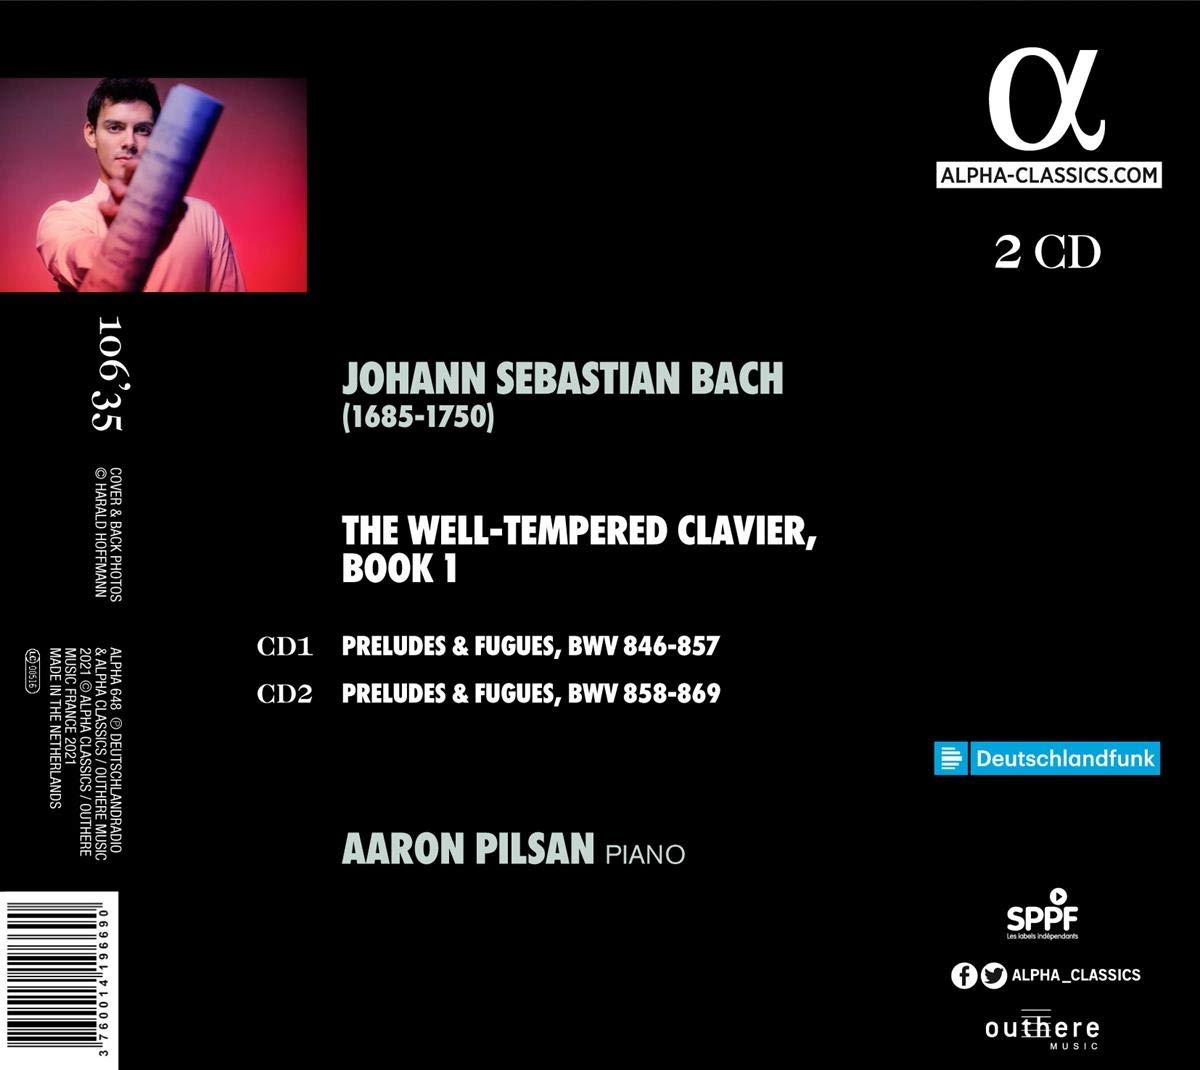 Aaron Pilsan 바흐: 평균율 클라비어곡집 1권 (J.S.Bach: The Well-Tempered Clavier Book I) 